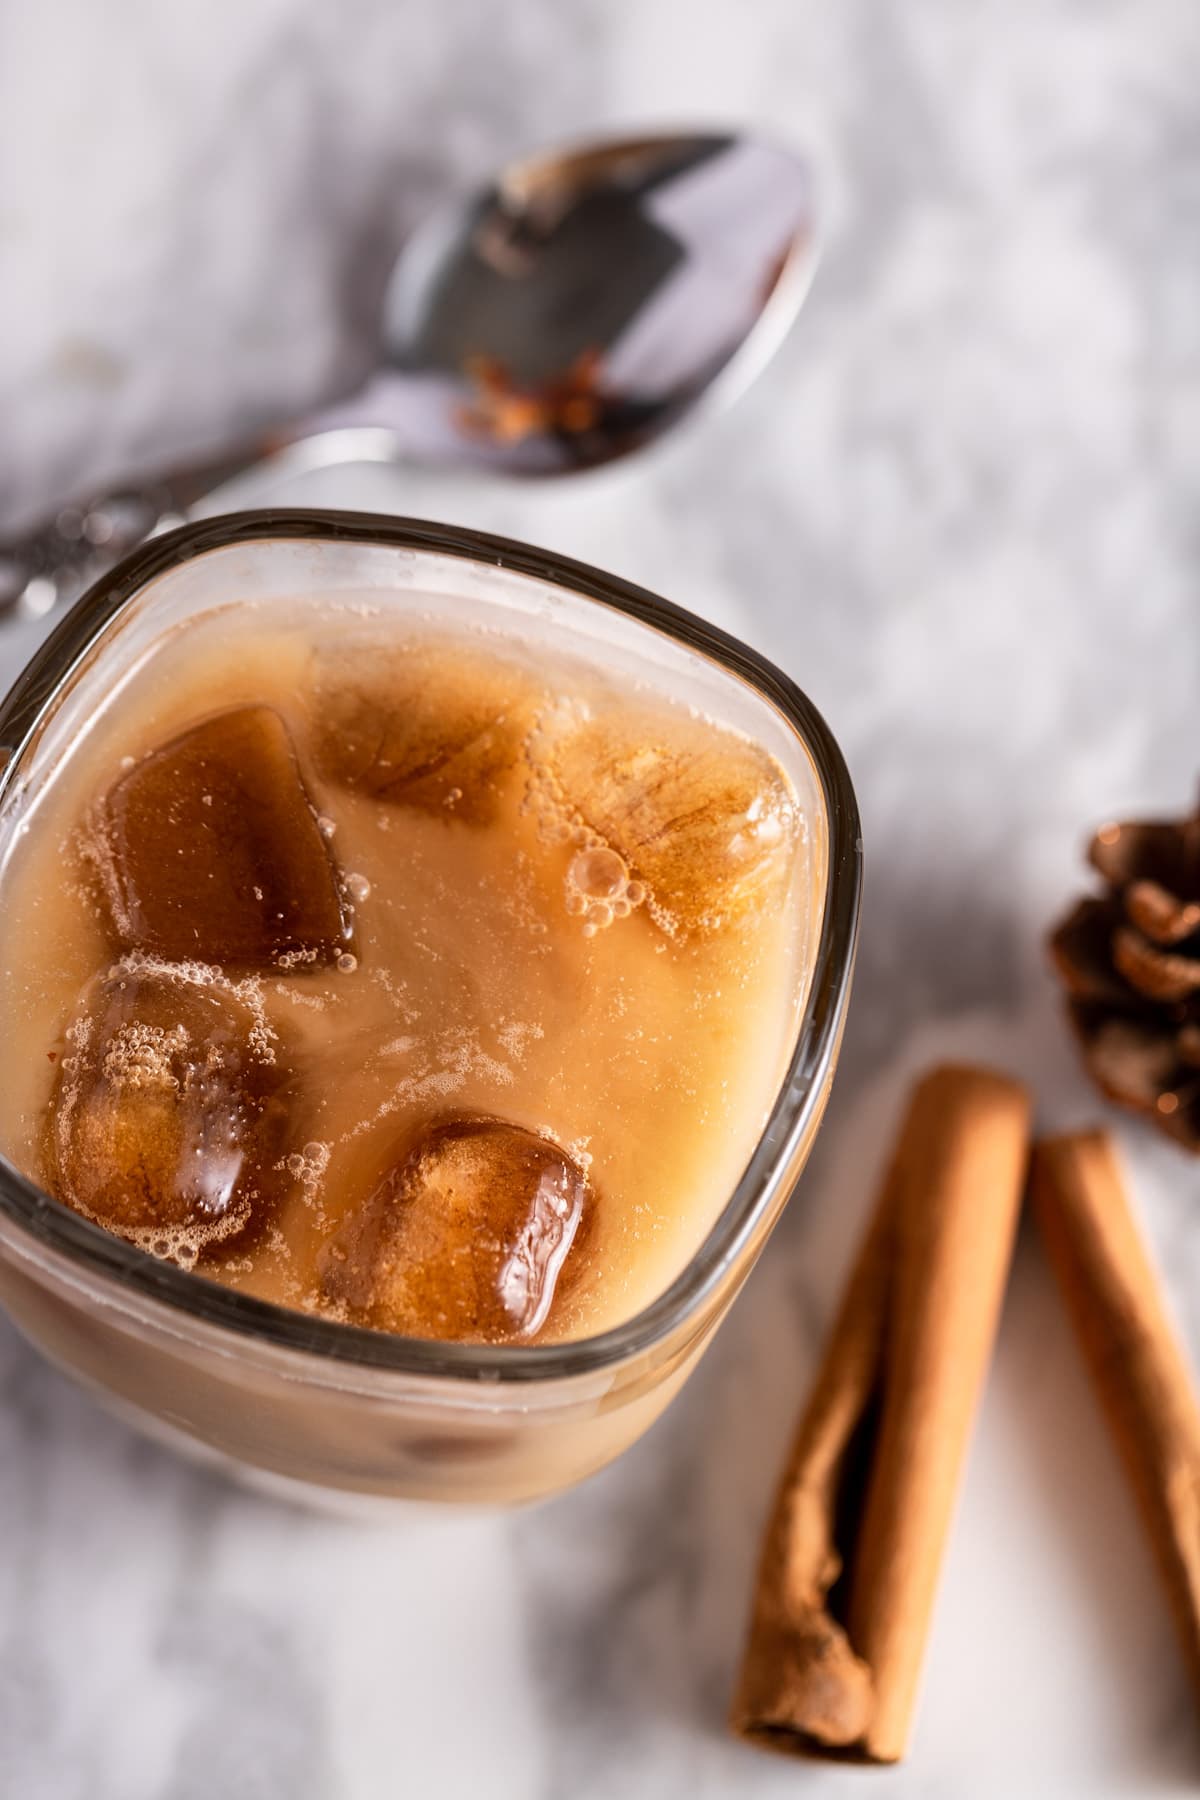 Overhead view of an iced chai tea latte with ice cubes, on a marble board, next to cinnamon sticks and a silver spoon.